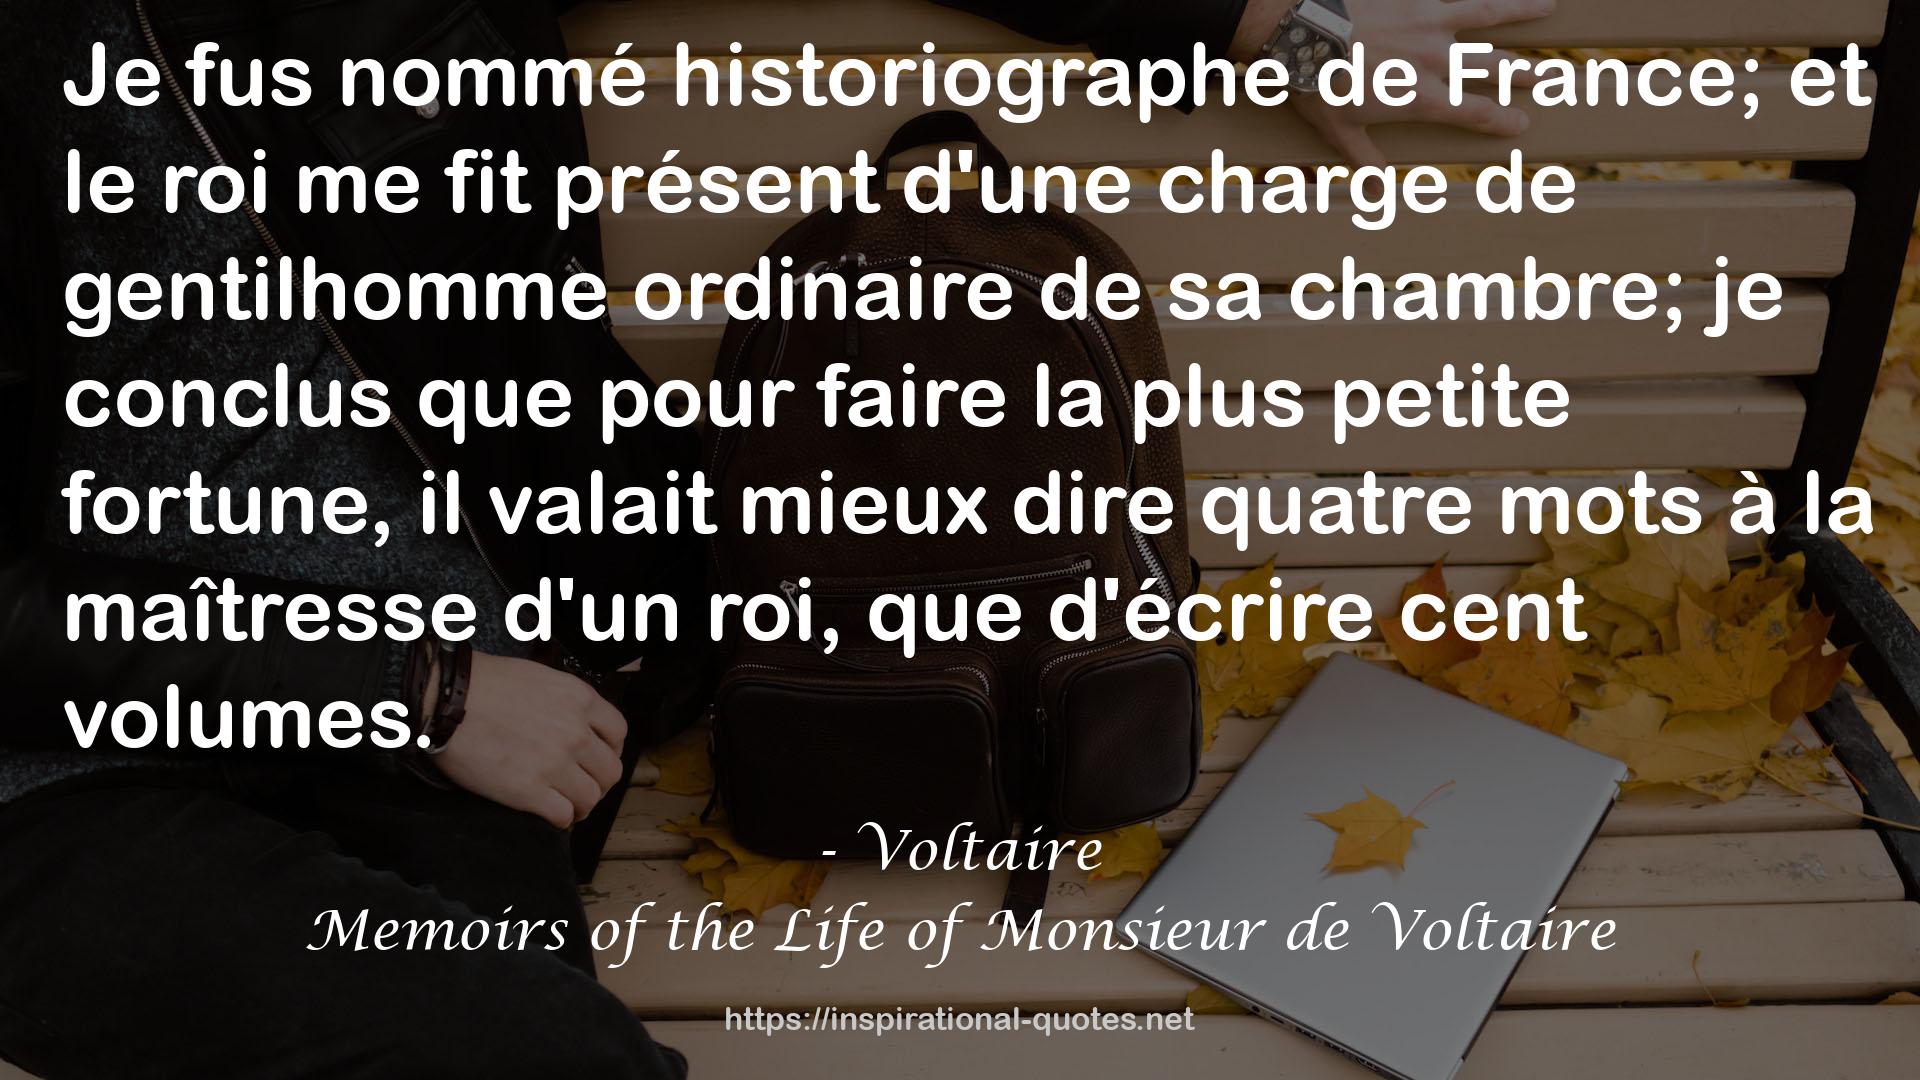 Memoirs of the Life of Monsieur de Voltaire QUOTES